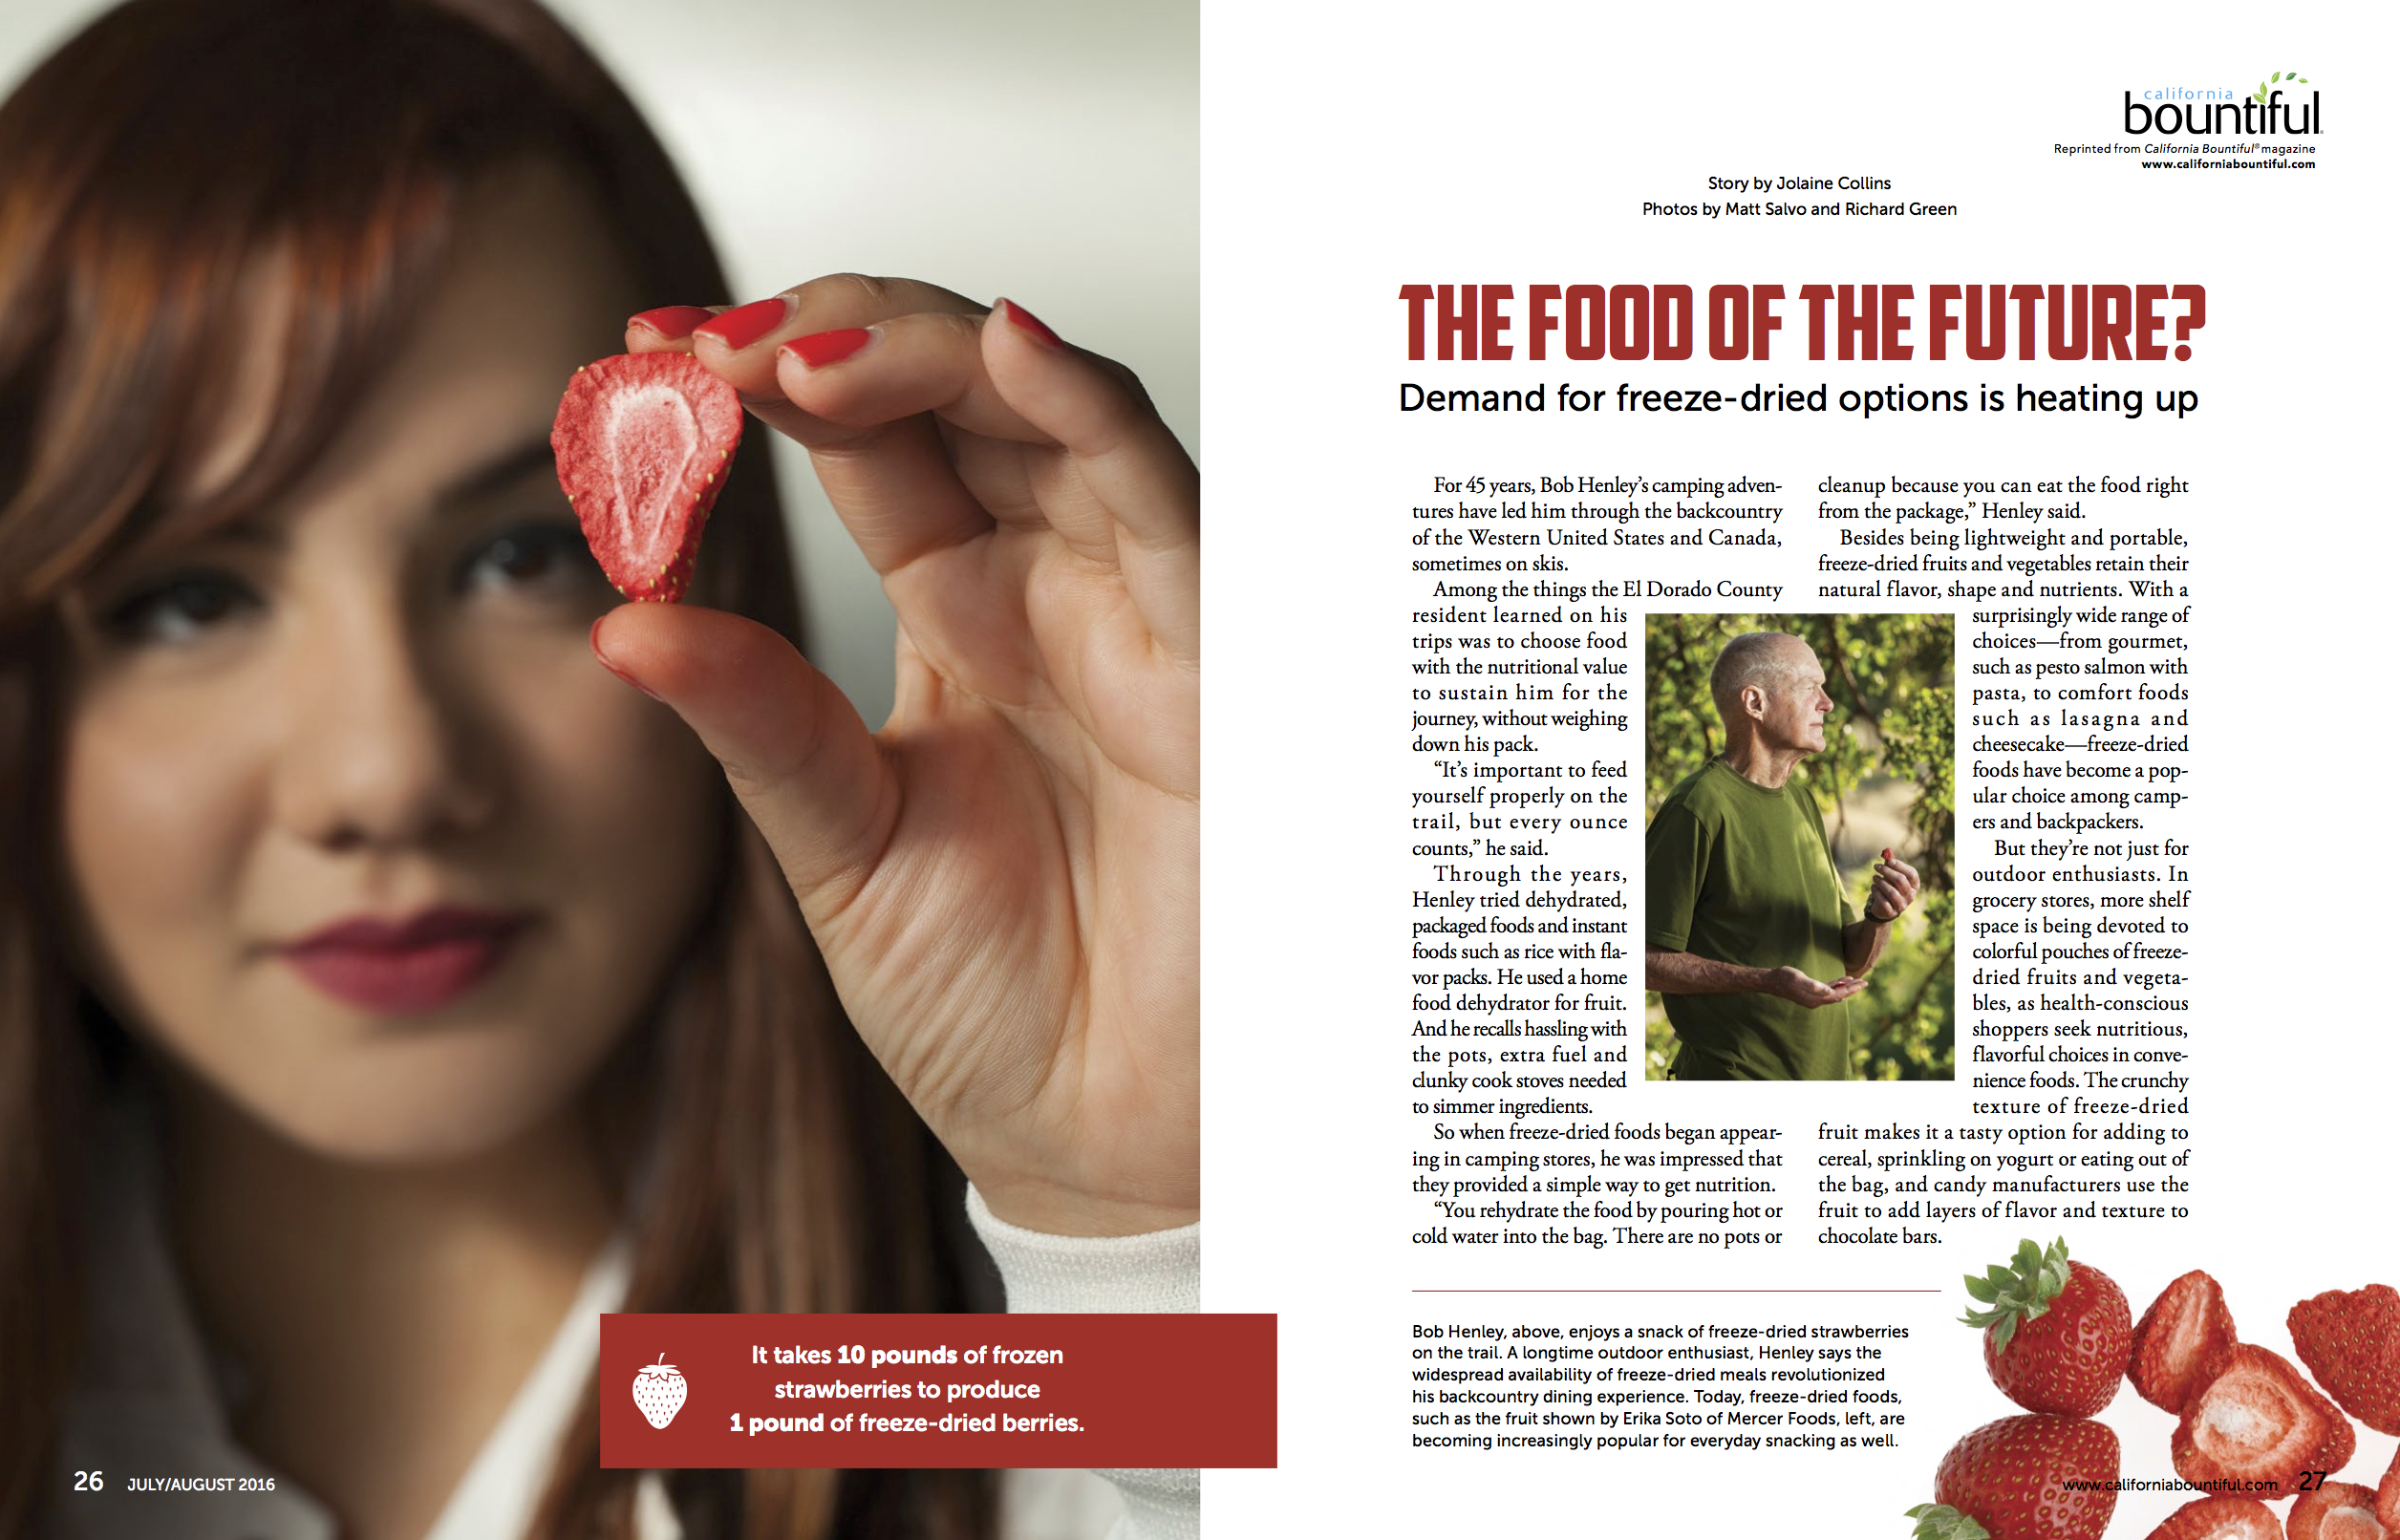 The July/August issue of California Bountiful Magazine features Mercer Foods and their innovative freeze-drying process.